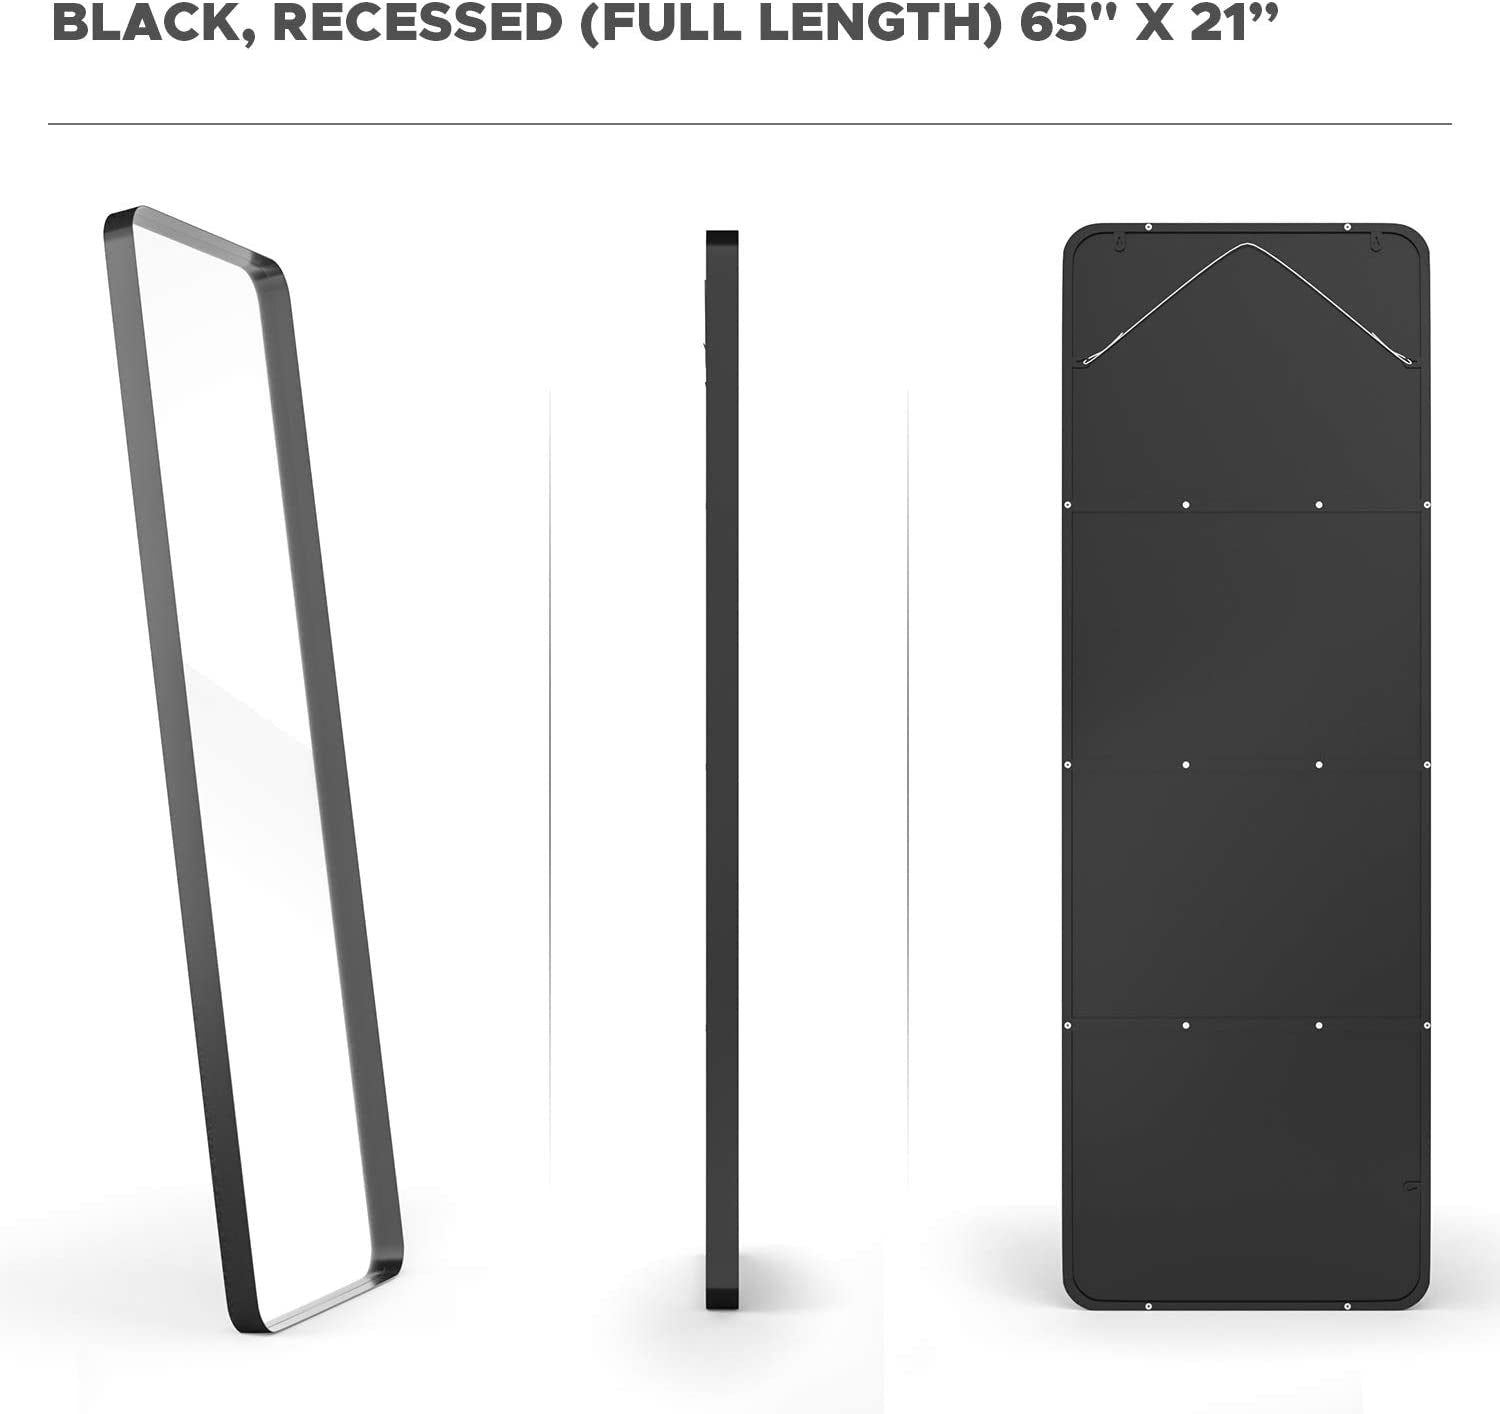 Full-Length Body Mirror - Large Leaning Floor Mirror for Bedroom or Bathroom - Tall, Long Size, Stylishly Modern Design - Easy to Install, Wall Hardware Included (Black, Recessed